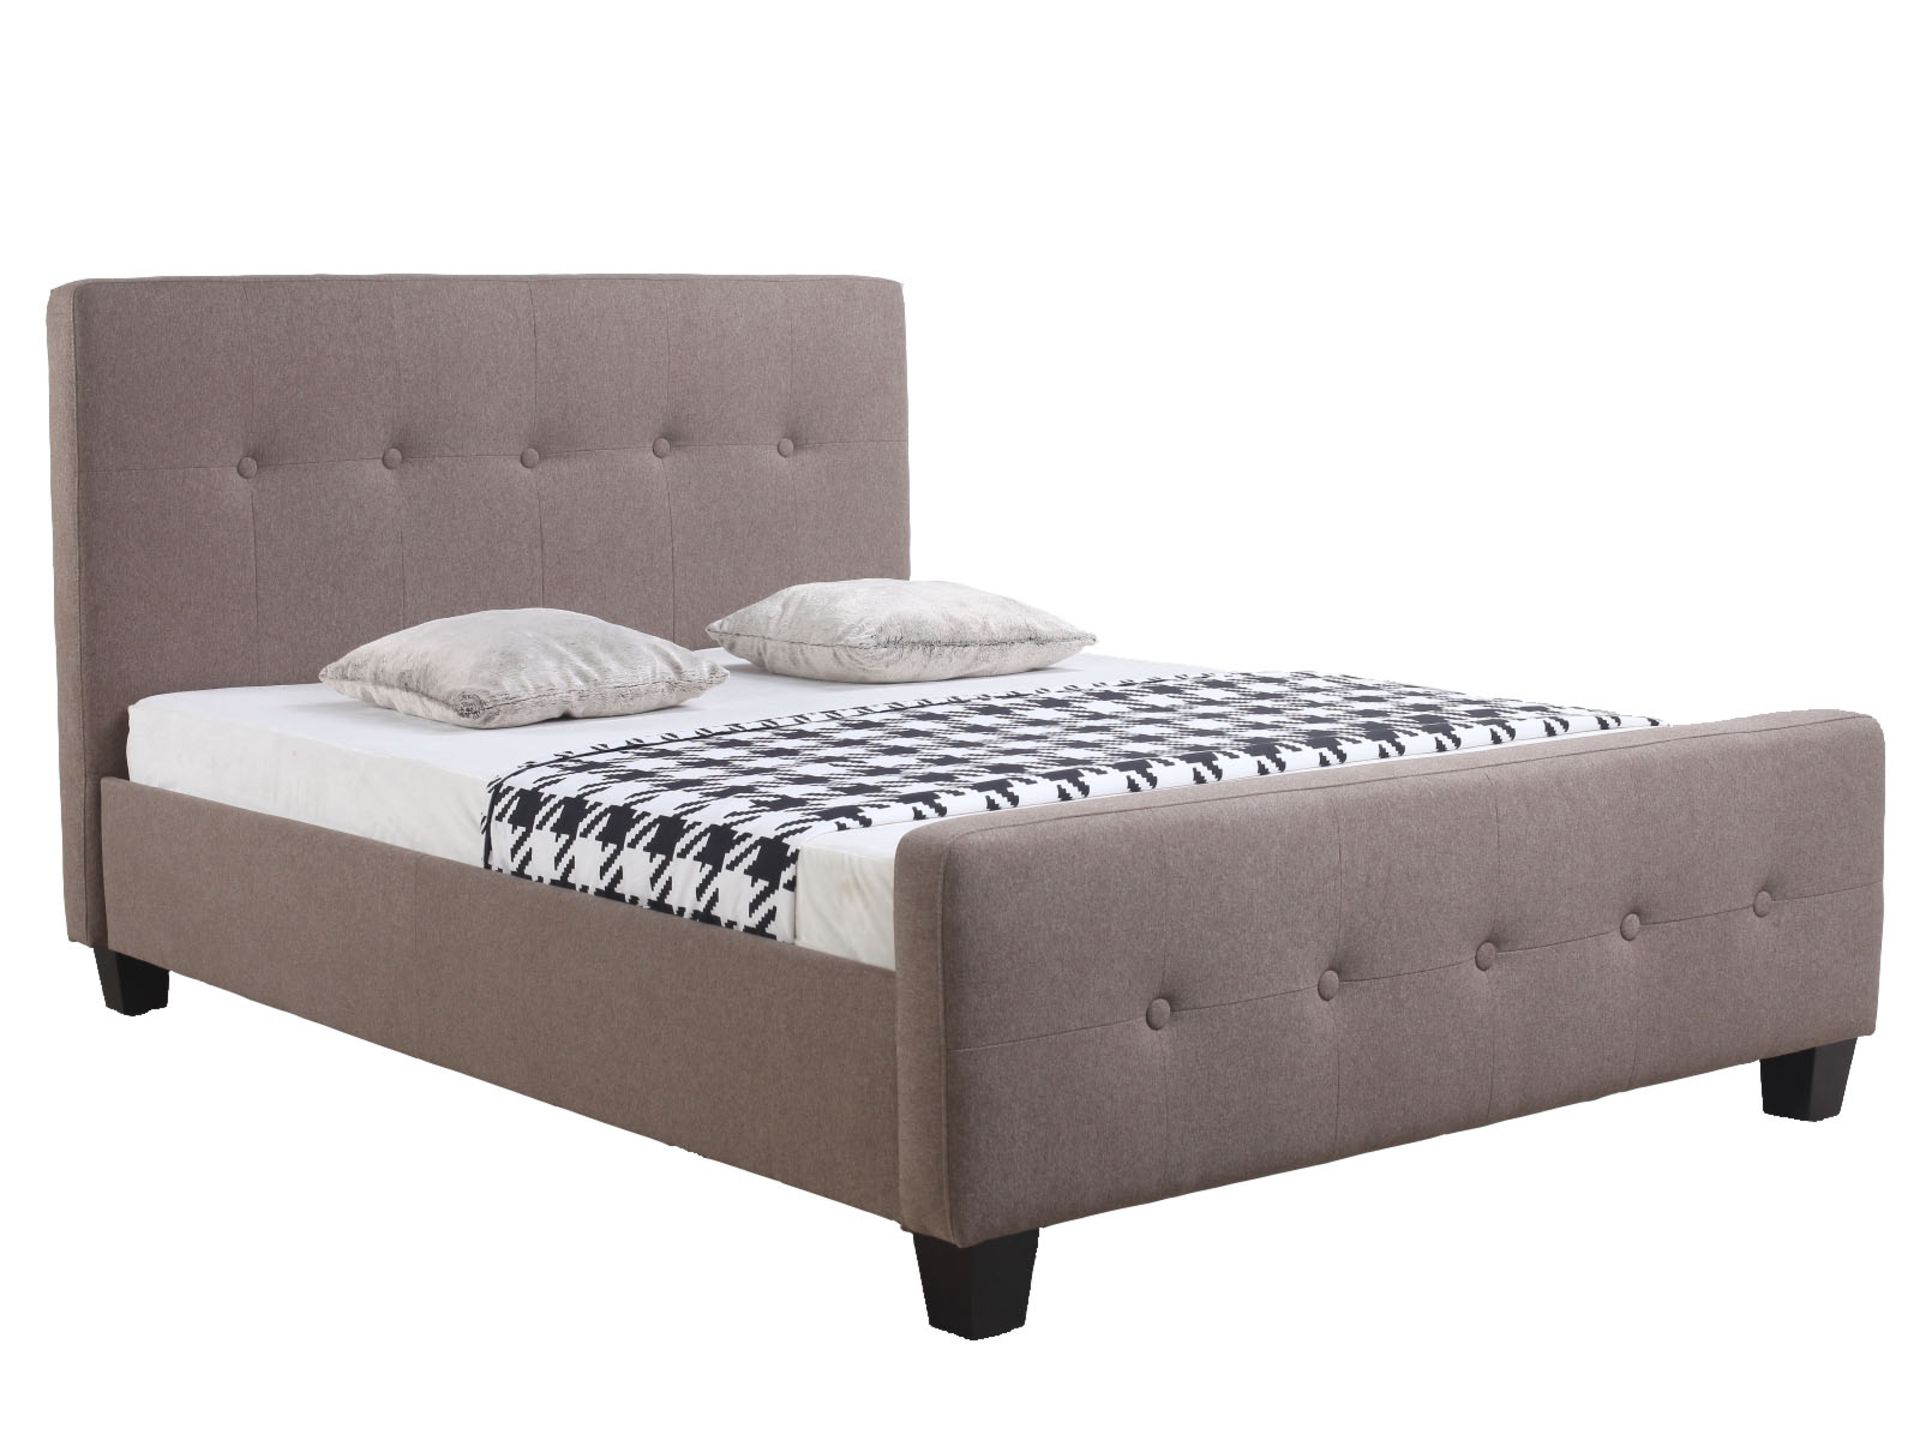 Brand new boxed direct from the manufacturers double Roxane bedstead in taupe